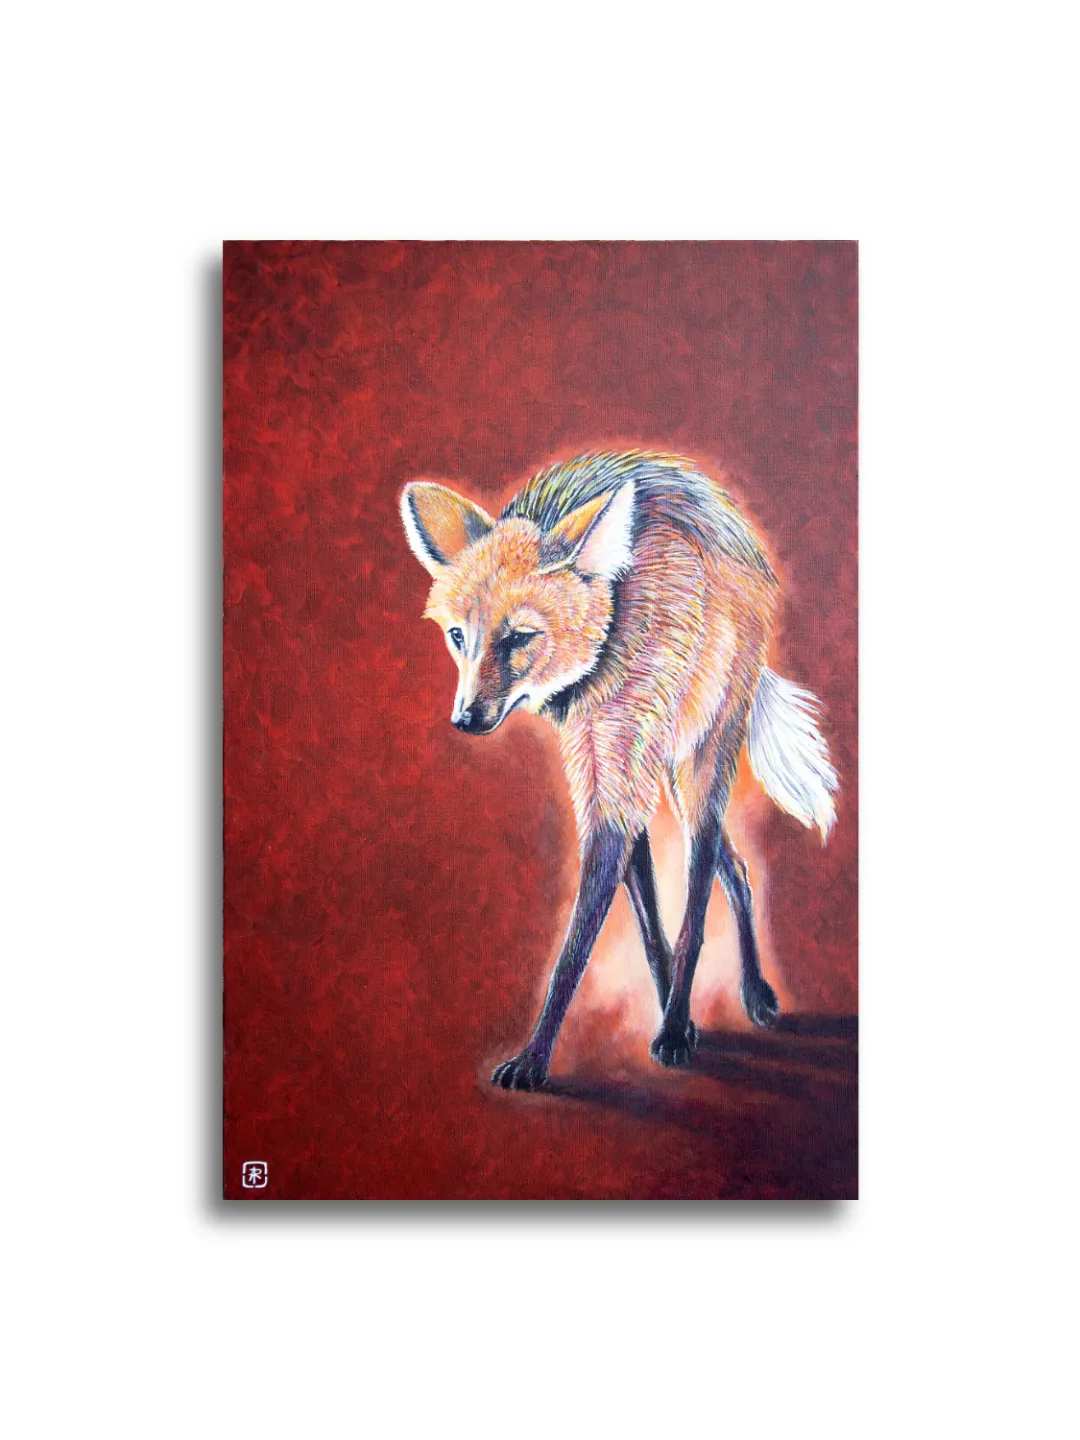 Maned Wolf by Ann Richmond - A stunning, Original artwork featuring a Maned Wolf. Painted in the artist's unique style... Framing available.